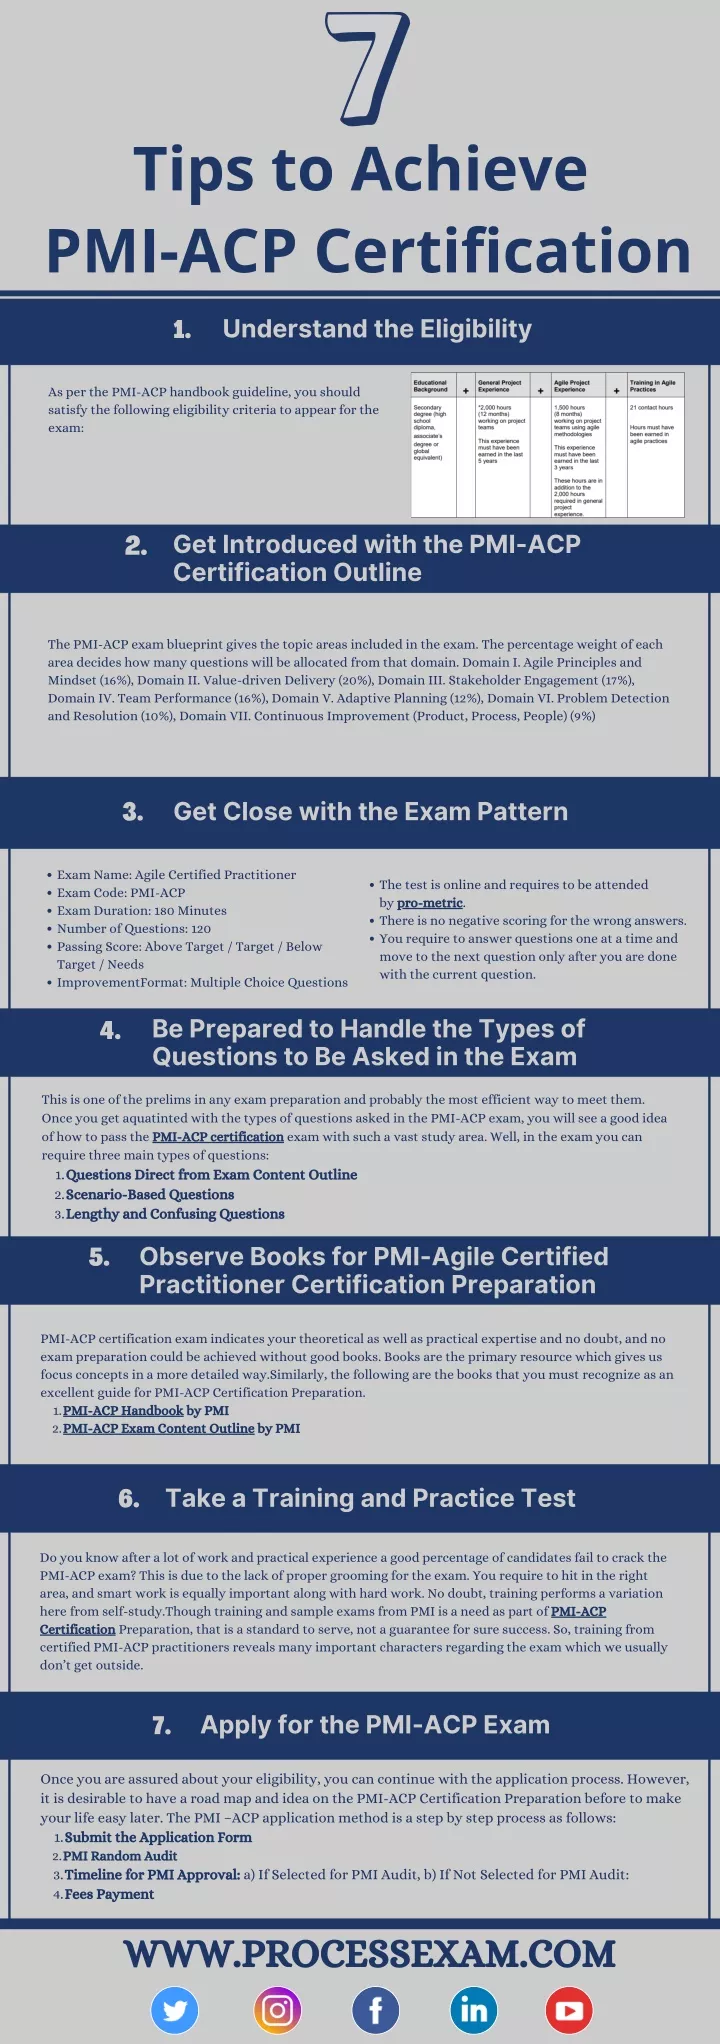 tips to achieve pmi acp certification